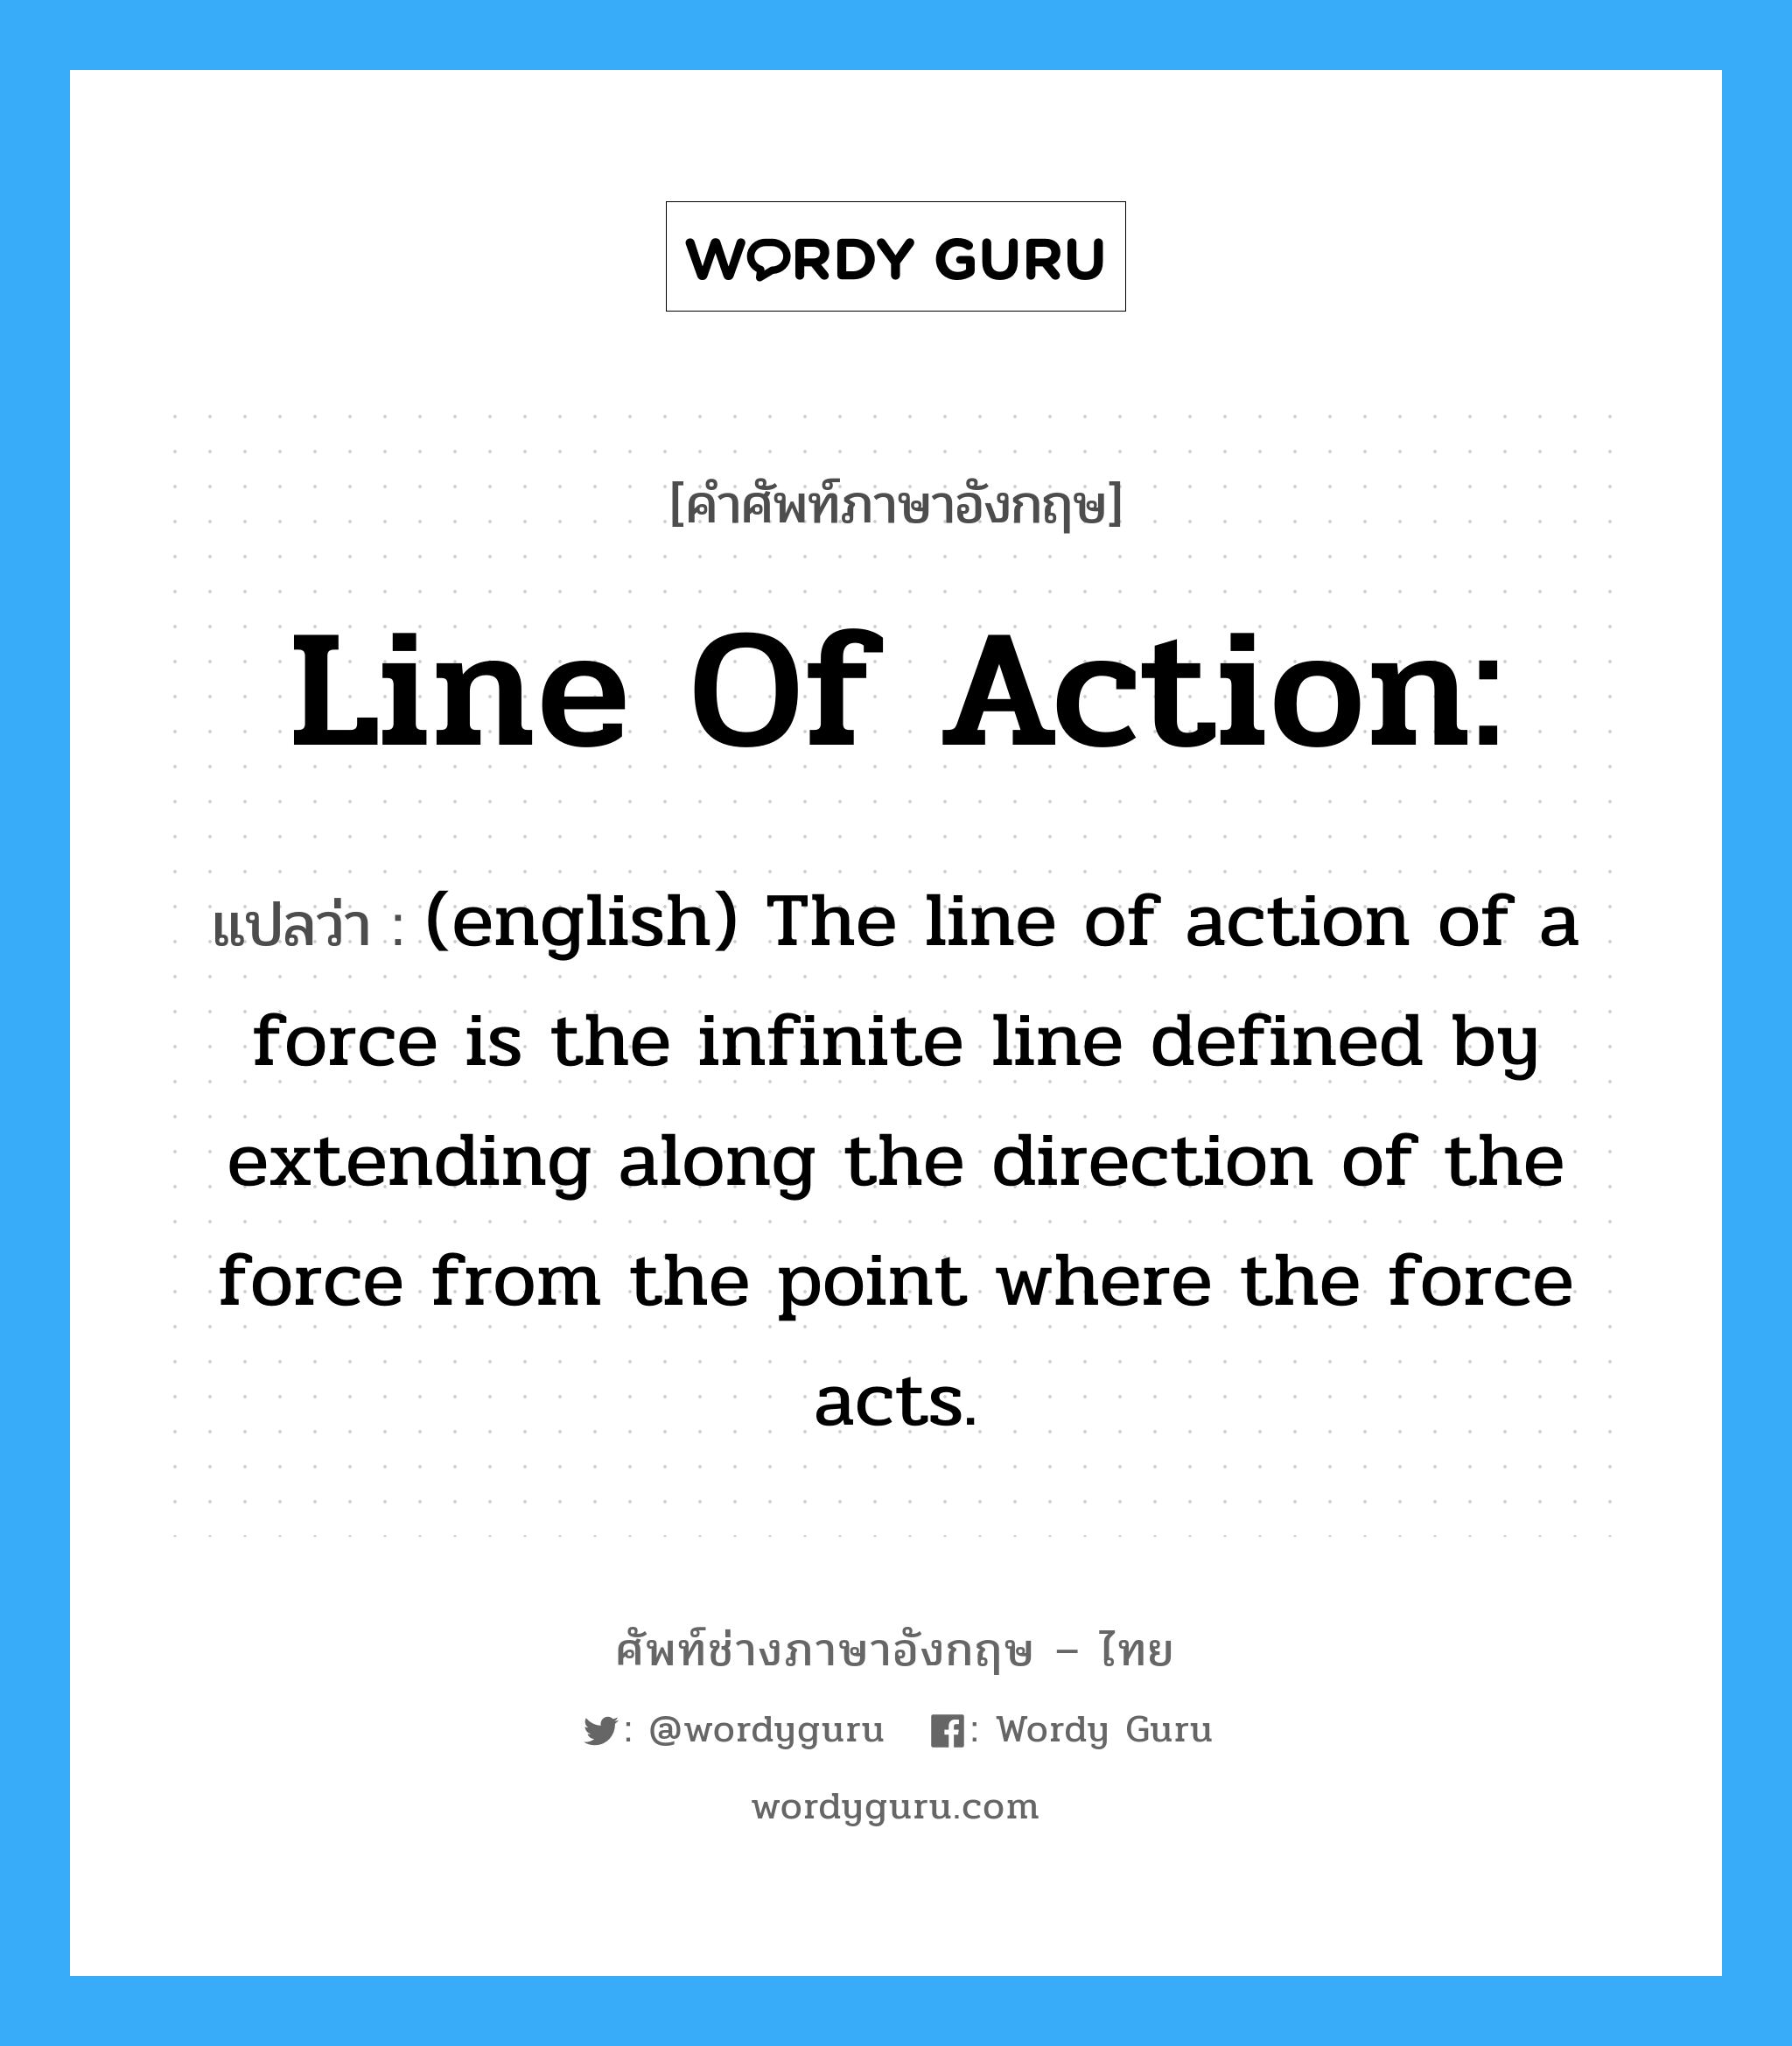 Line of Action: แปลว่า?, คำศัพท์ช่างภาษาอังกฤษ - ไทย Line of Action: คำศัพท์ภาษาอังกฤษ Line of Action: แปลว่า (english) The line of action of a force is the infinite line defined by extending along the direction of the force from the point where the force acts.